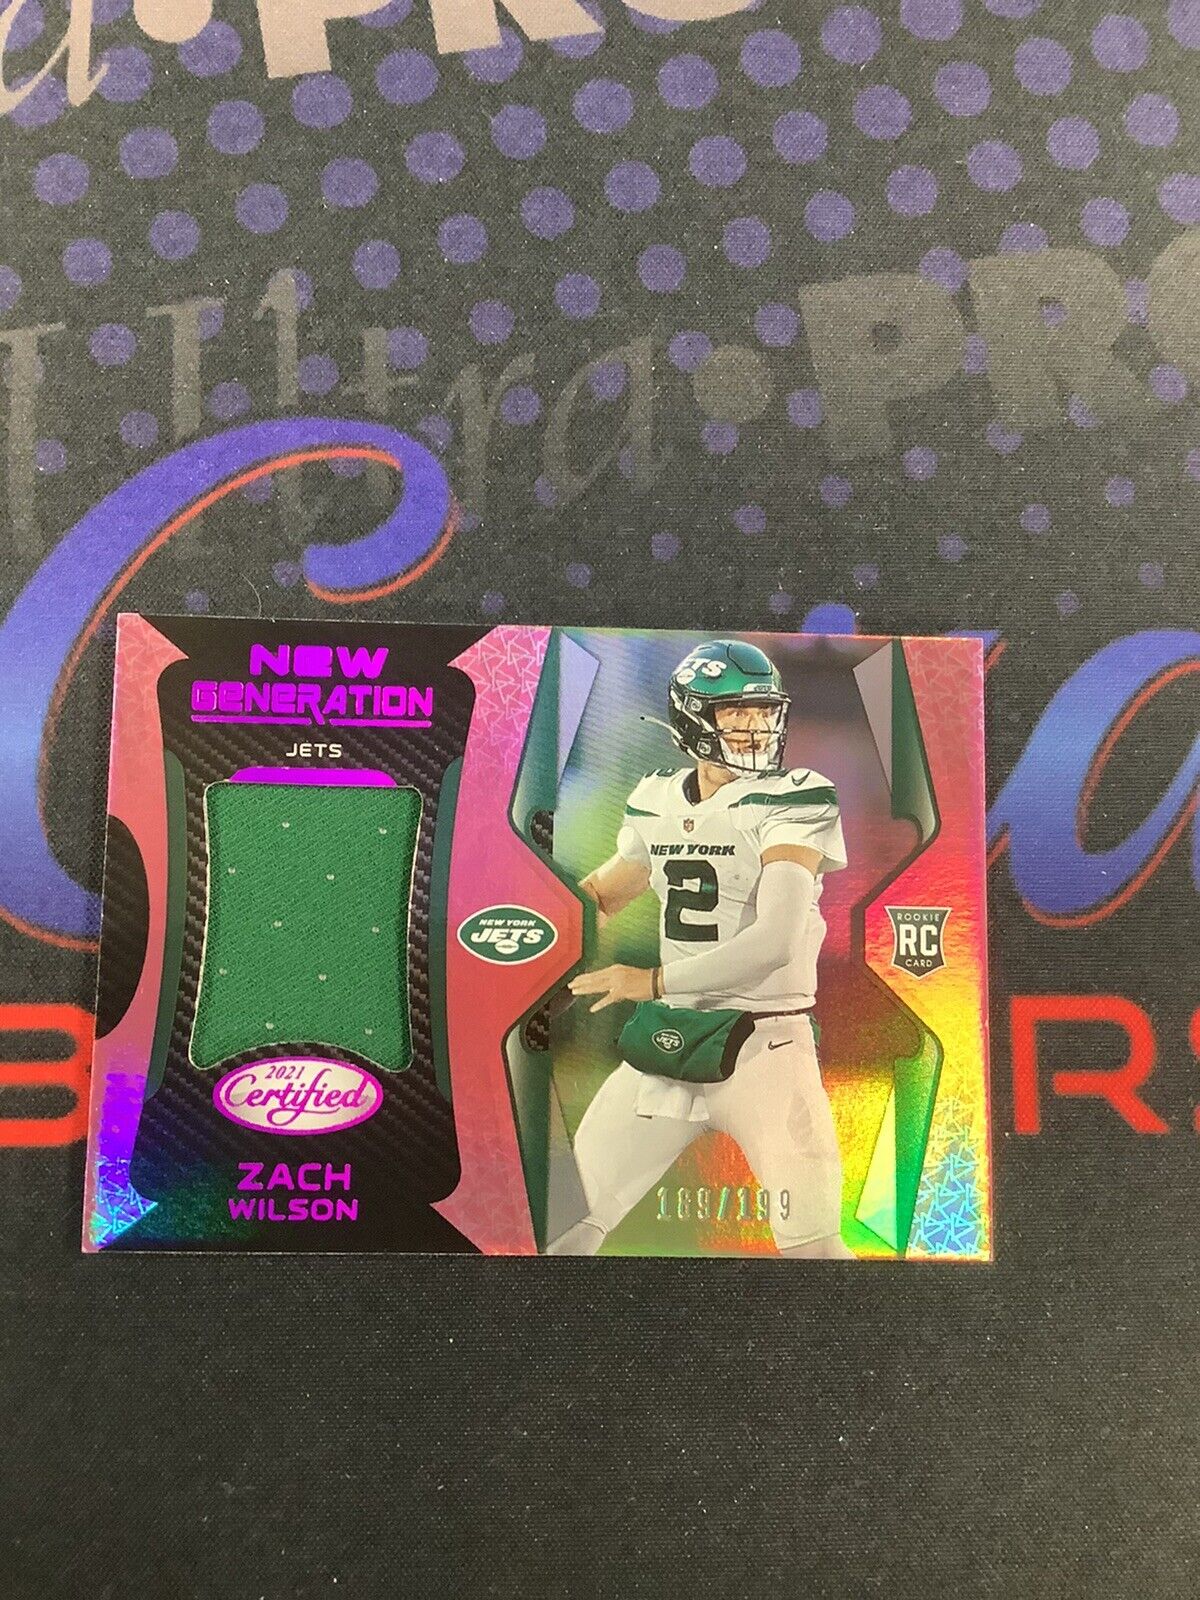 2021 ZACH WILSON CERTIFIED NEW GENERATION MIRROR PINK ROOKIE 189/199 NG-2